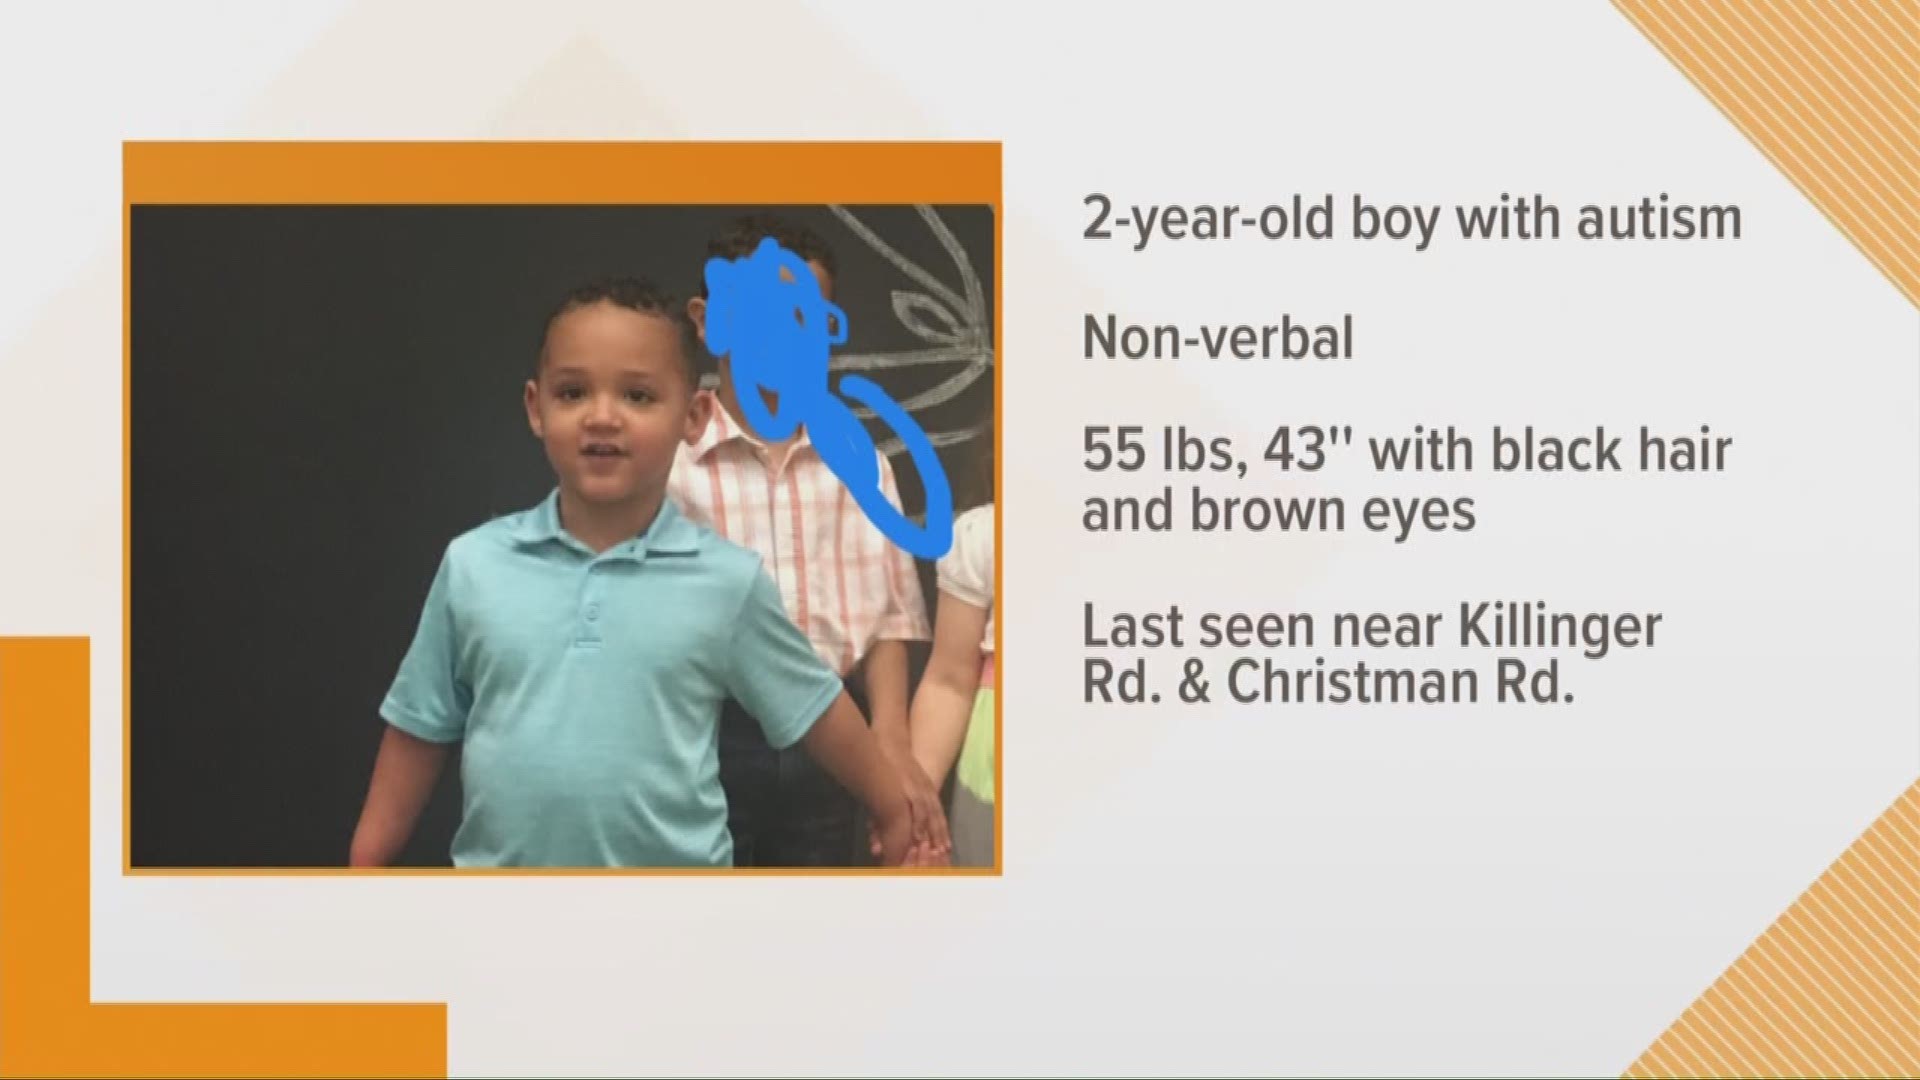 April 22, 2019: Authorities are searching for a 2-year-old boy who is missing from Green. The boy, Kaven Fisher, is non-verbal and autistic. He was last seen at home around 8:30 p.m. Sunday in the area of Killinger and Christman roads in Green.